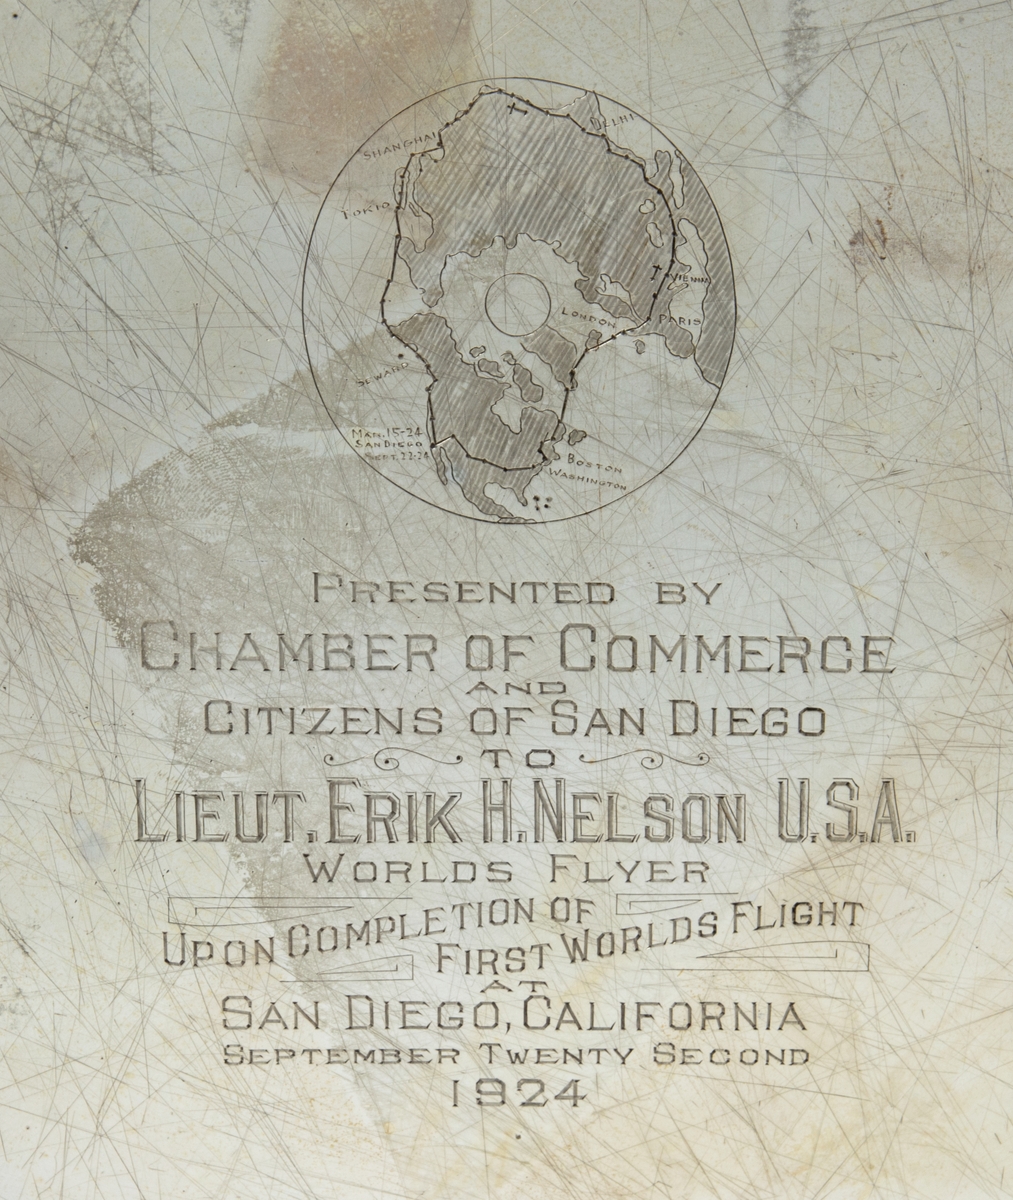 Silverbricka med oval form och utfasade handtag på vardera sida. Text: "Presented by Chamber of Commerce and citizens of San Diego to Lieut. Erik H Nelson U.S.A. Worlds flyer Upon Completion of first worlds flight, San Diego, California September Twenty Second 1924".